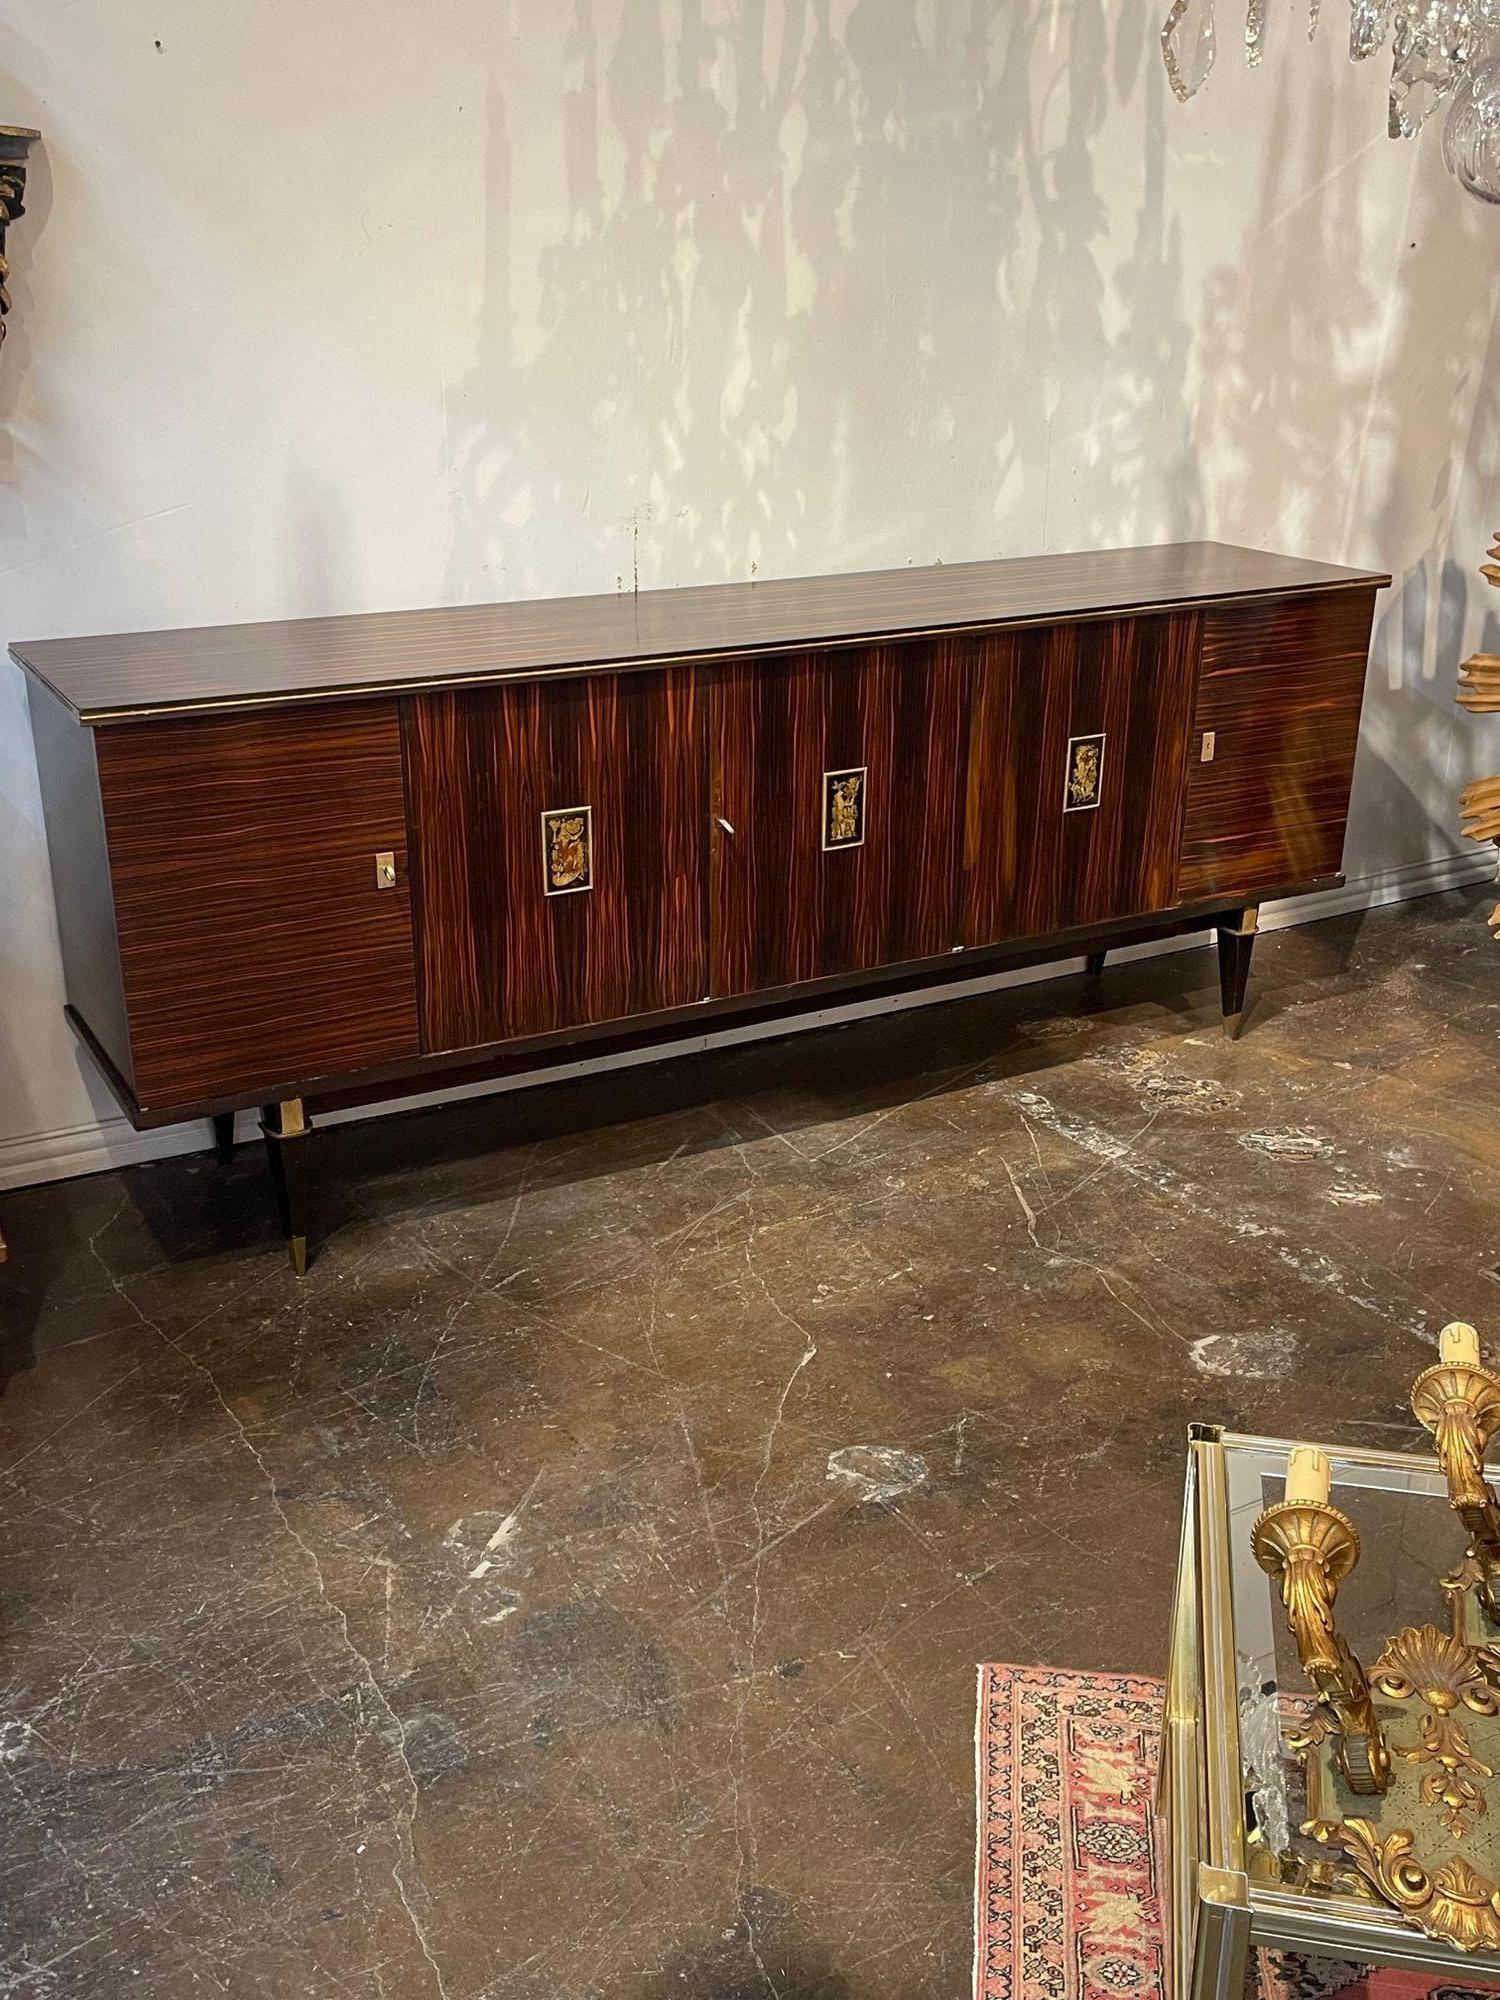 Handsome mid-century French Macassar and ebonized wood sideboard. This cabinet has an exceptional finish and tons of storage. This is a quality piece has that creates a very high-end look!